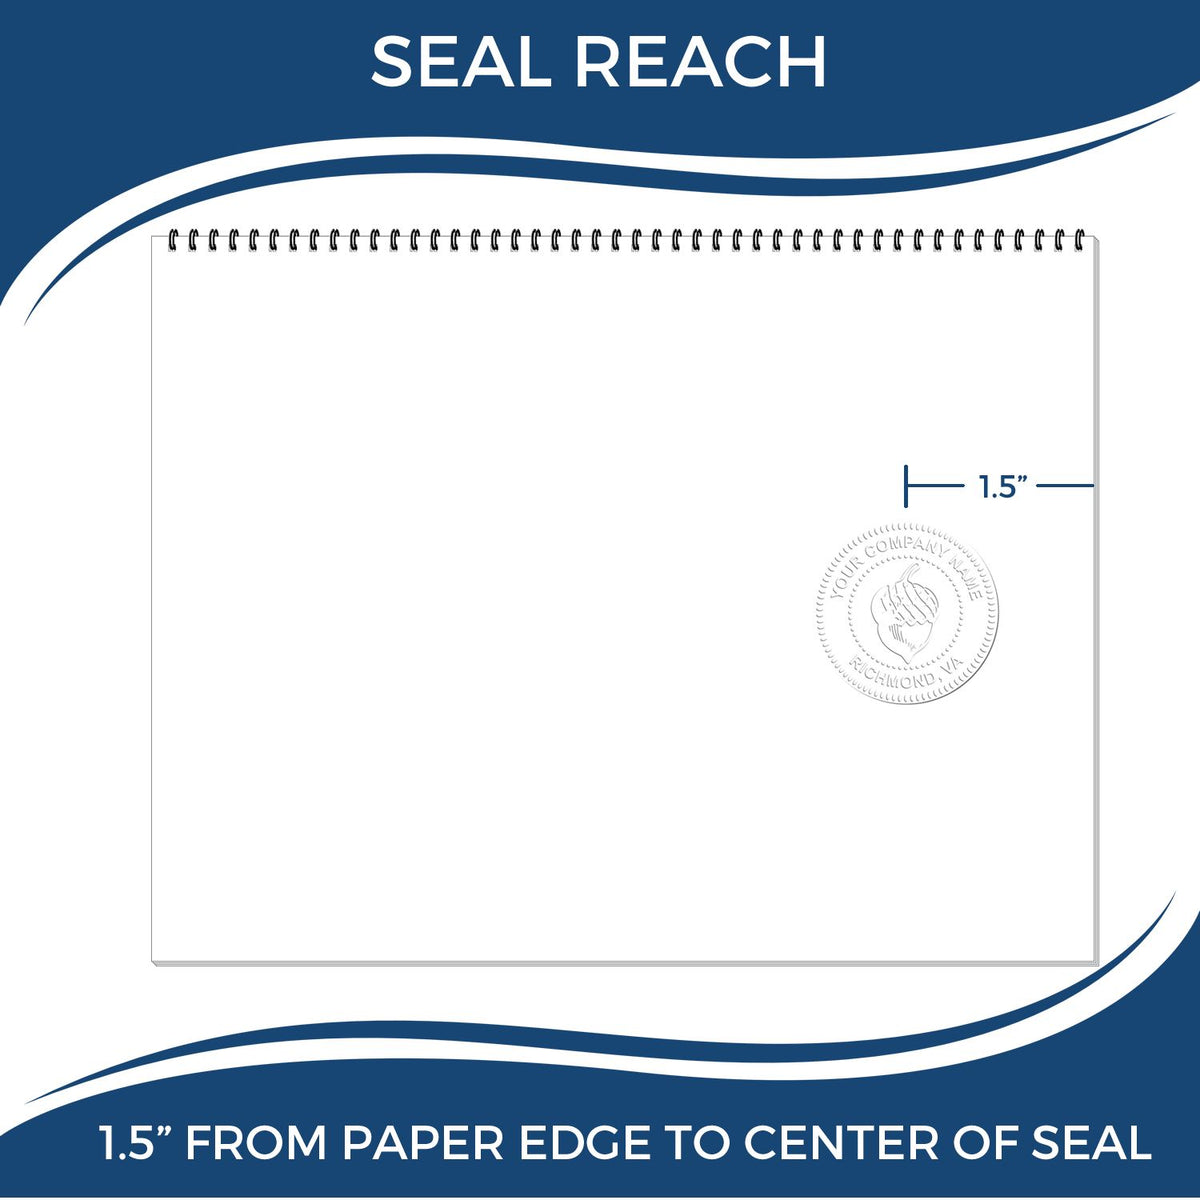 An infographic showing the seal reach which is represented by a ruler and a miniature seal image of the Missouri Desk Architect Embossing Seal